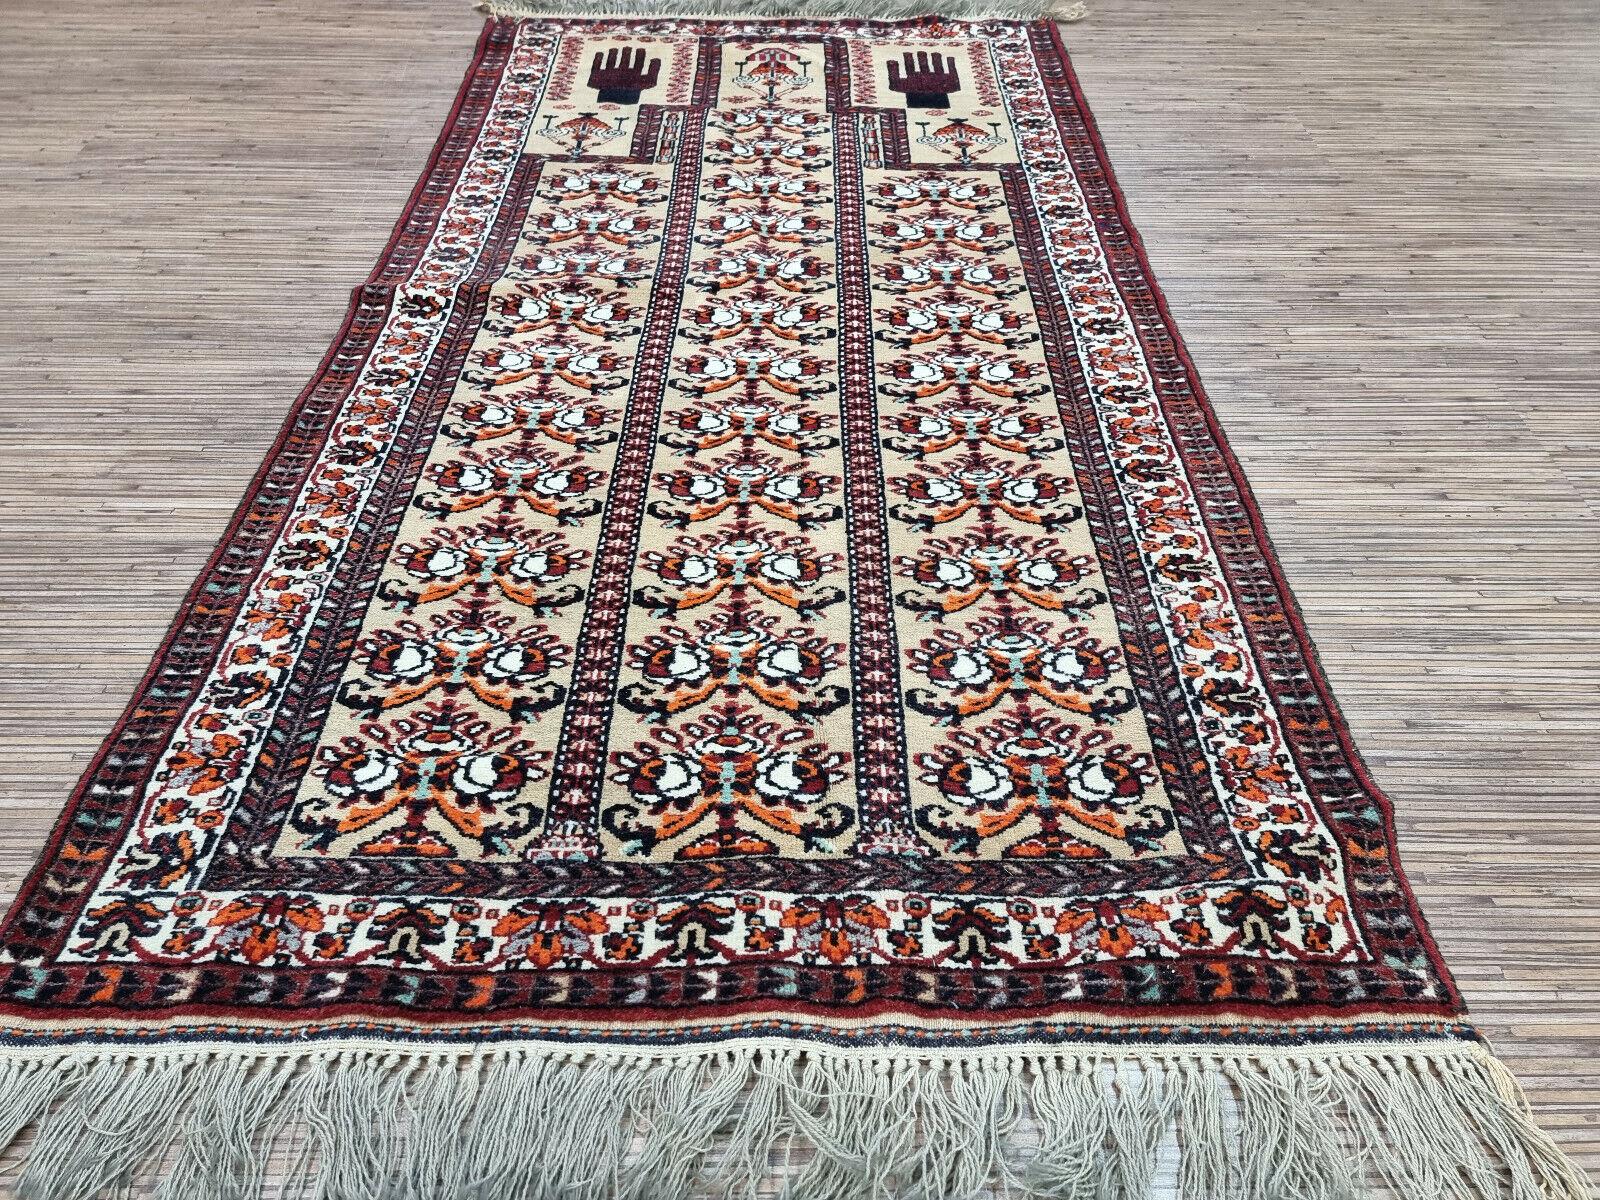 Hand-Knotted Handmade Vintage Afghan Baluch Prayer Rug 2.4' x 4.7', 1960s - 1D93 For Sale